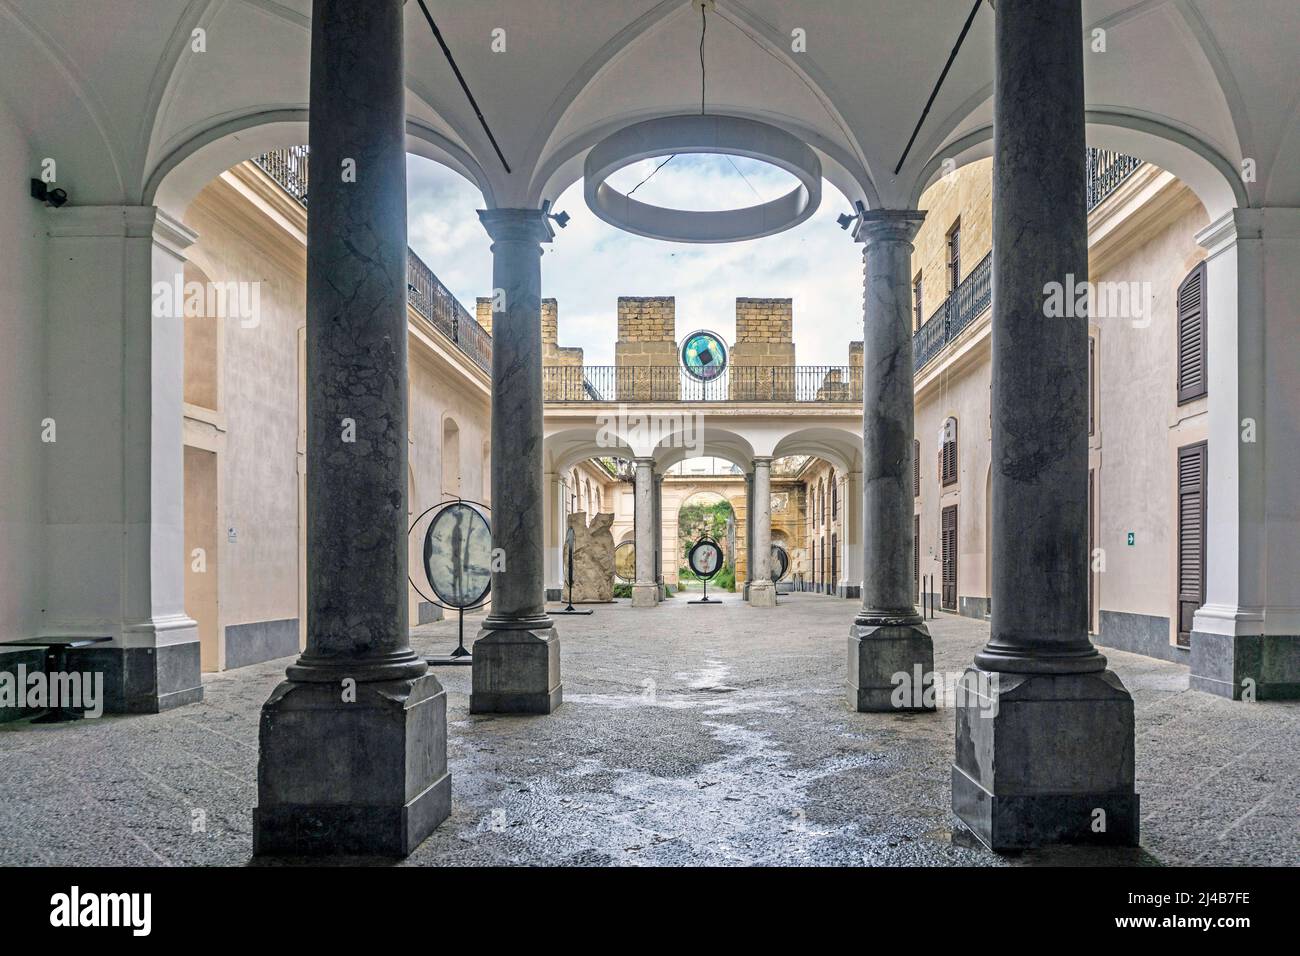 The entrance to Palazzo Riso, contemporary Art Museum In Palermo,Sicily Italy. Stock Photo